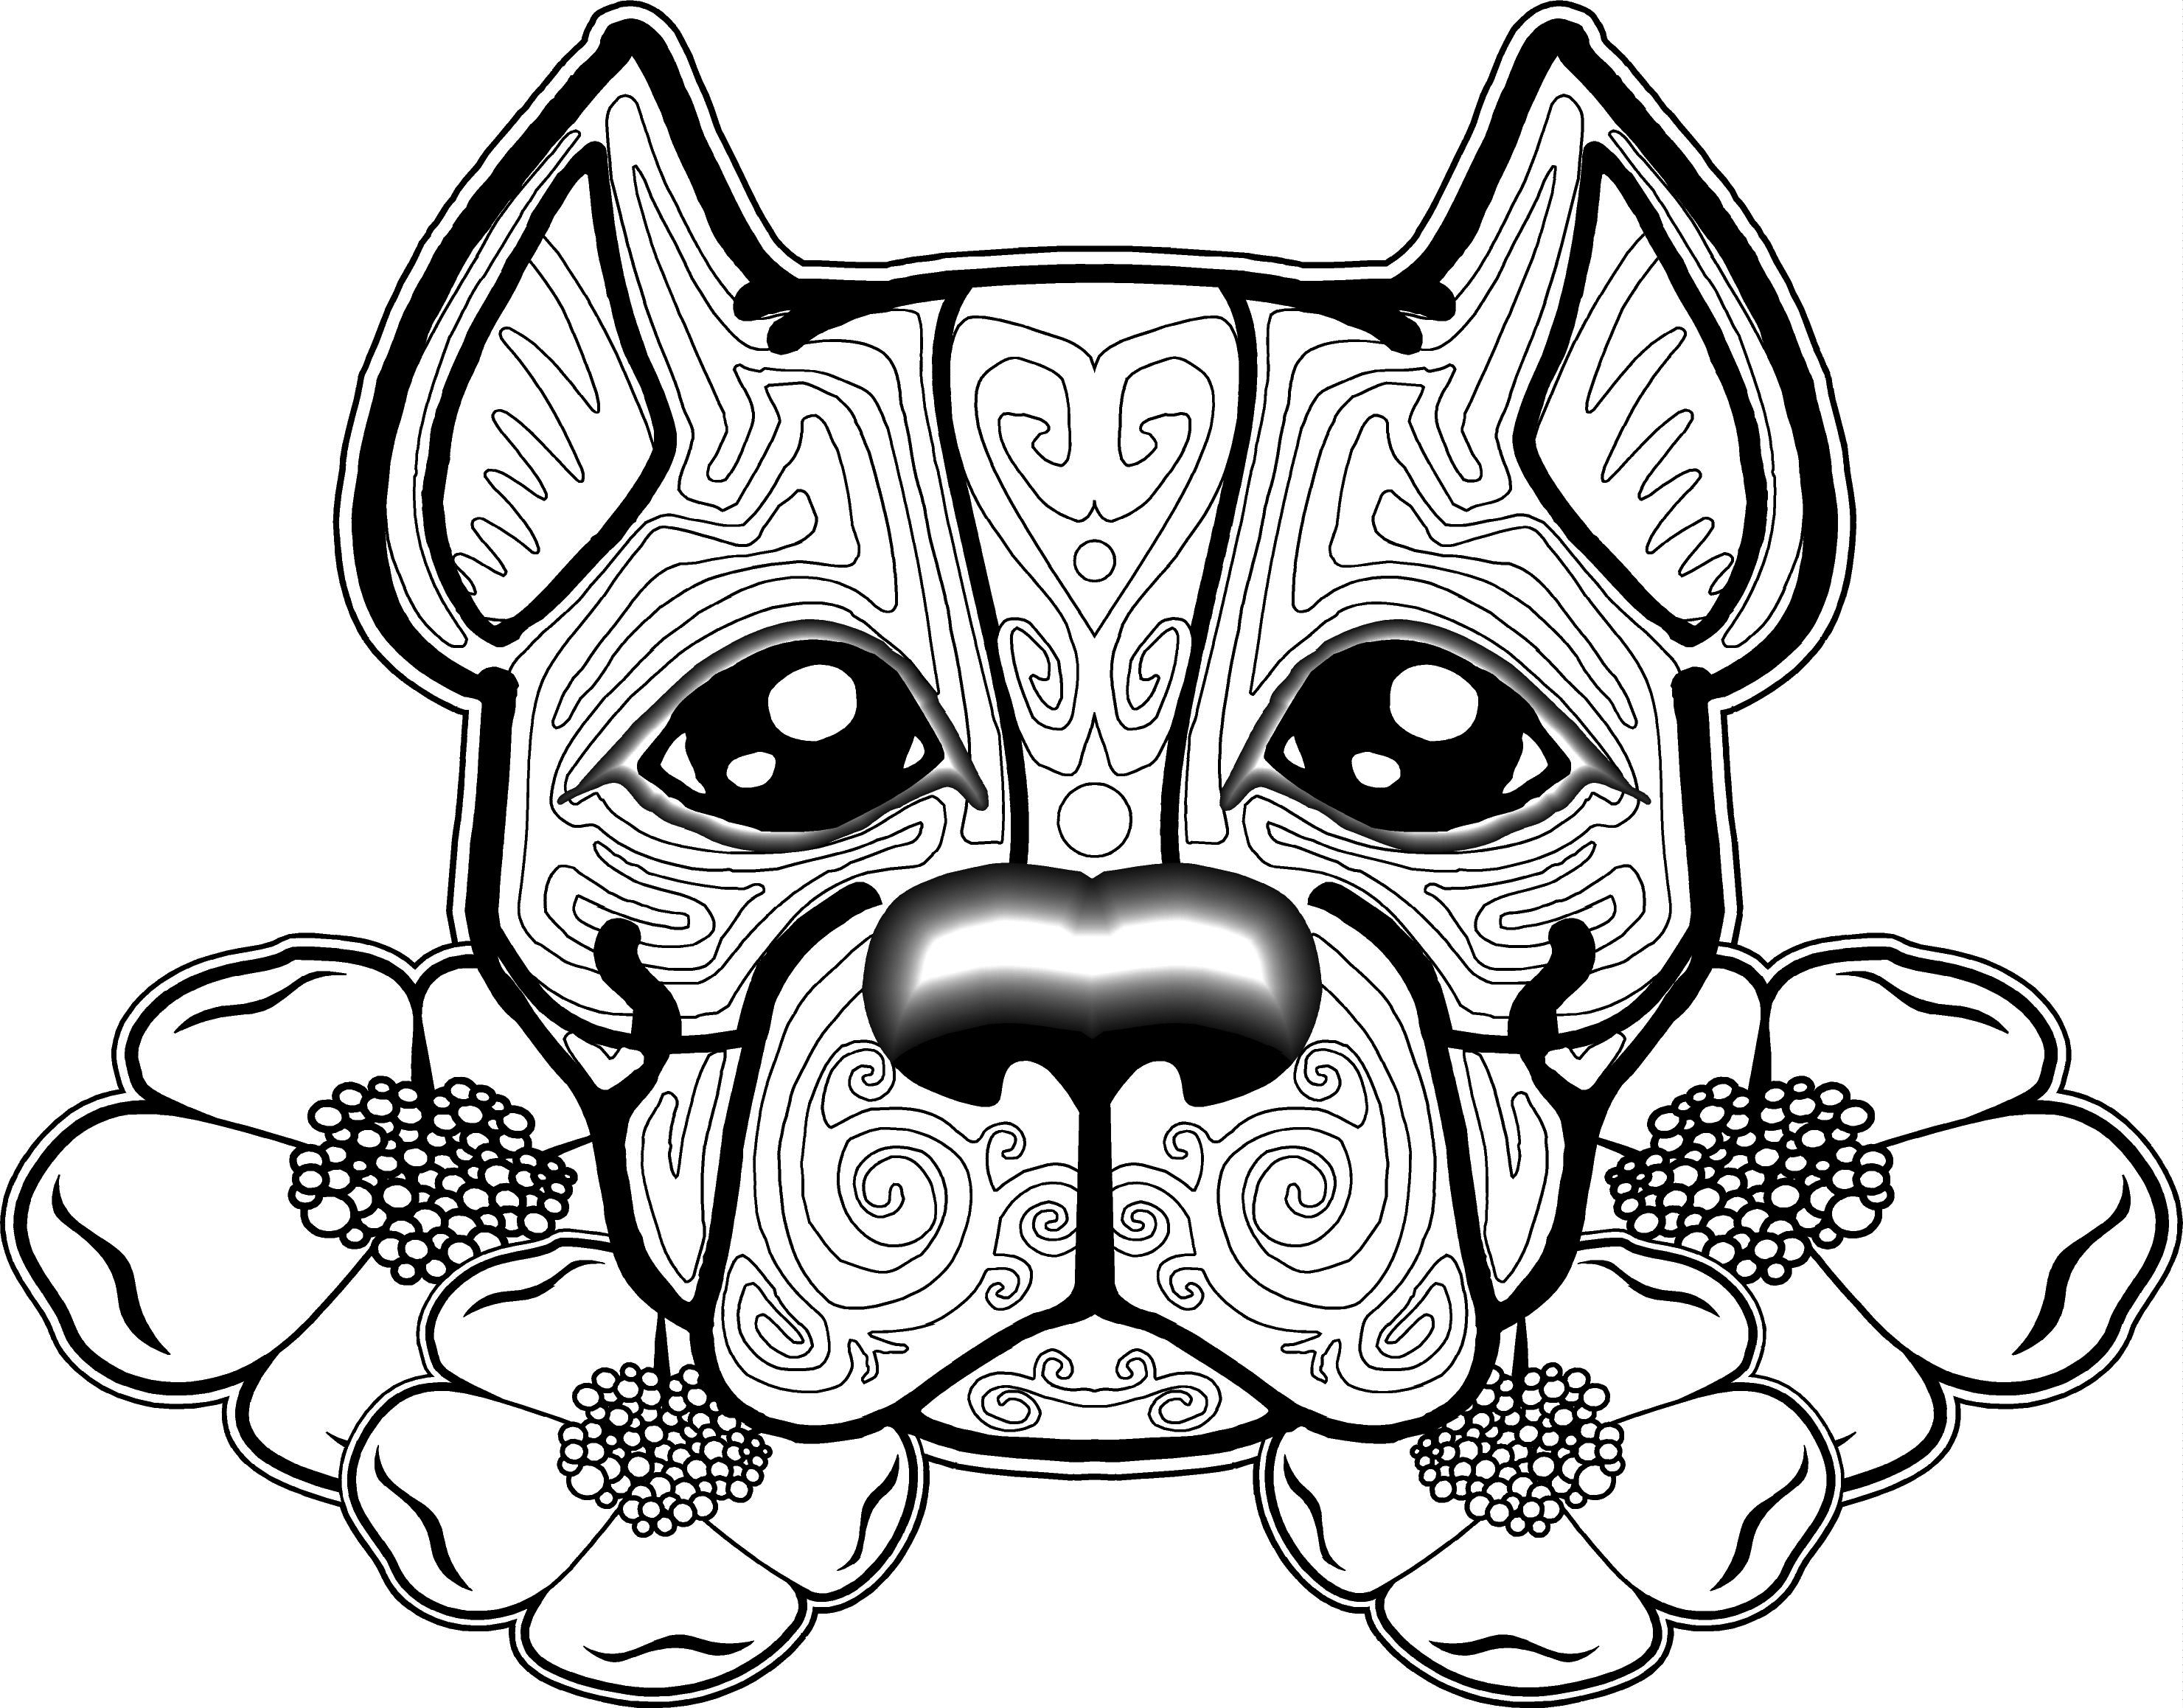 Pitbull Coloring Pages - Best Coloring Pages For Kids